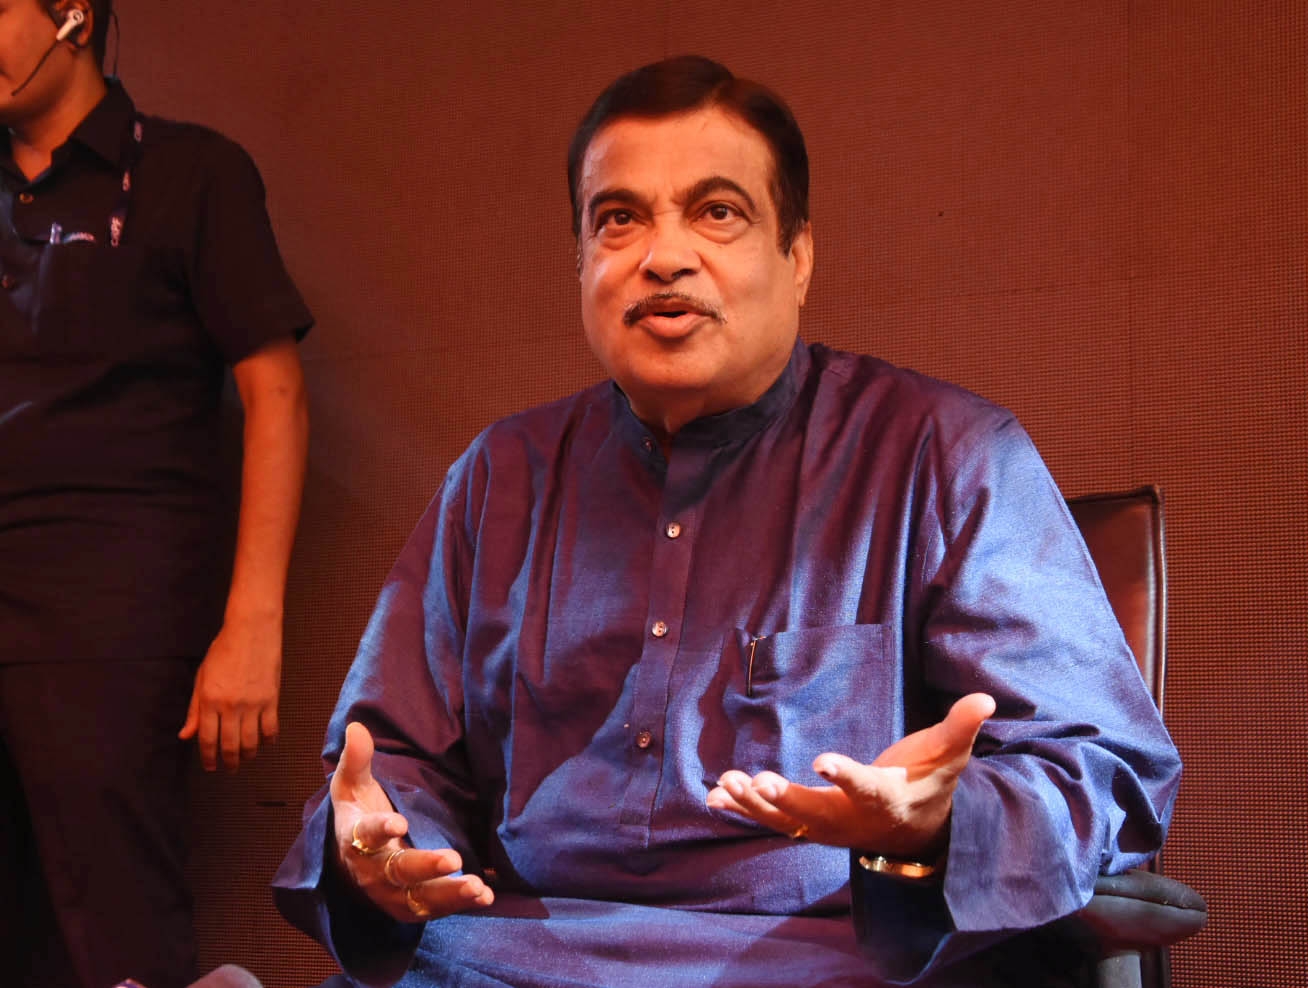 Nagpur: Union Minister Nitin Gadkari addresses a press conference, in Nagpur, on May 23, 2019. (Photo: IANS) by .